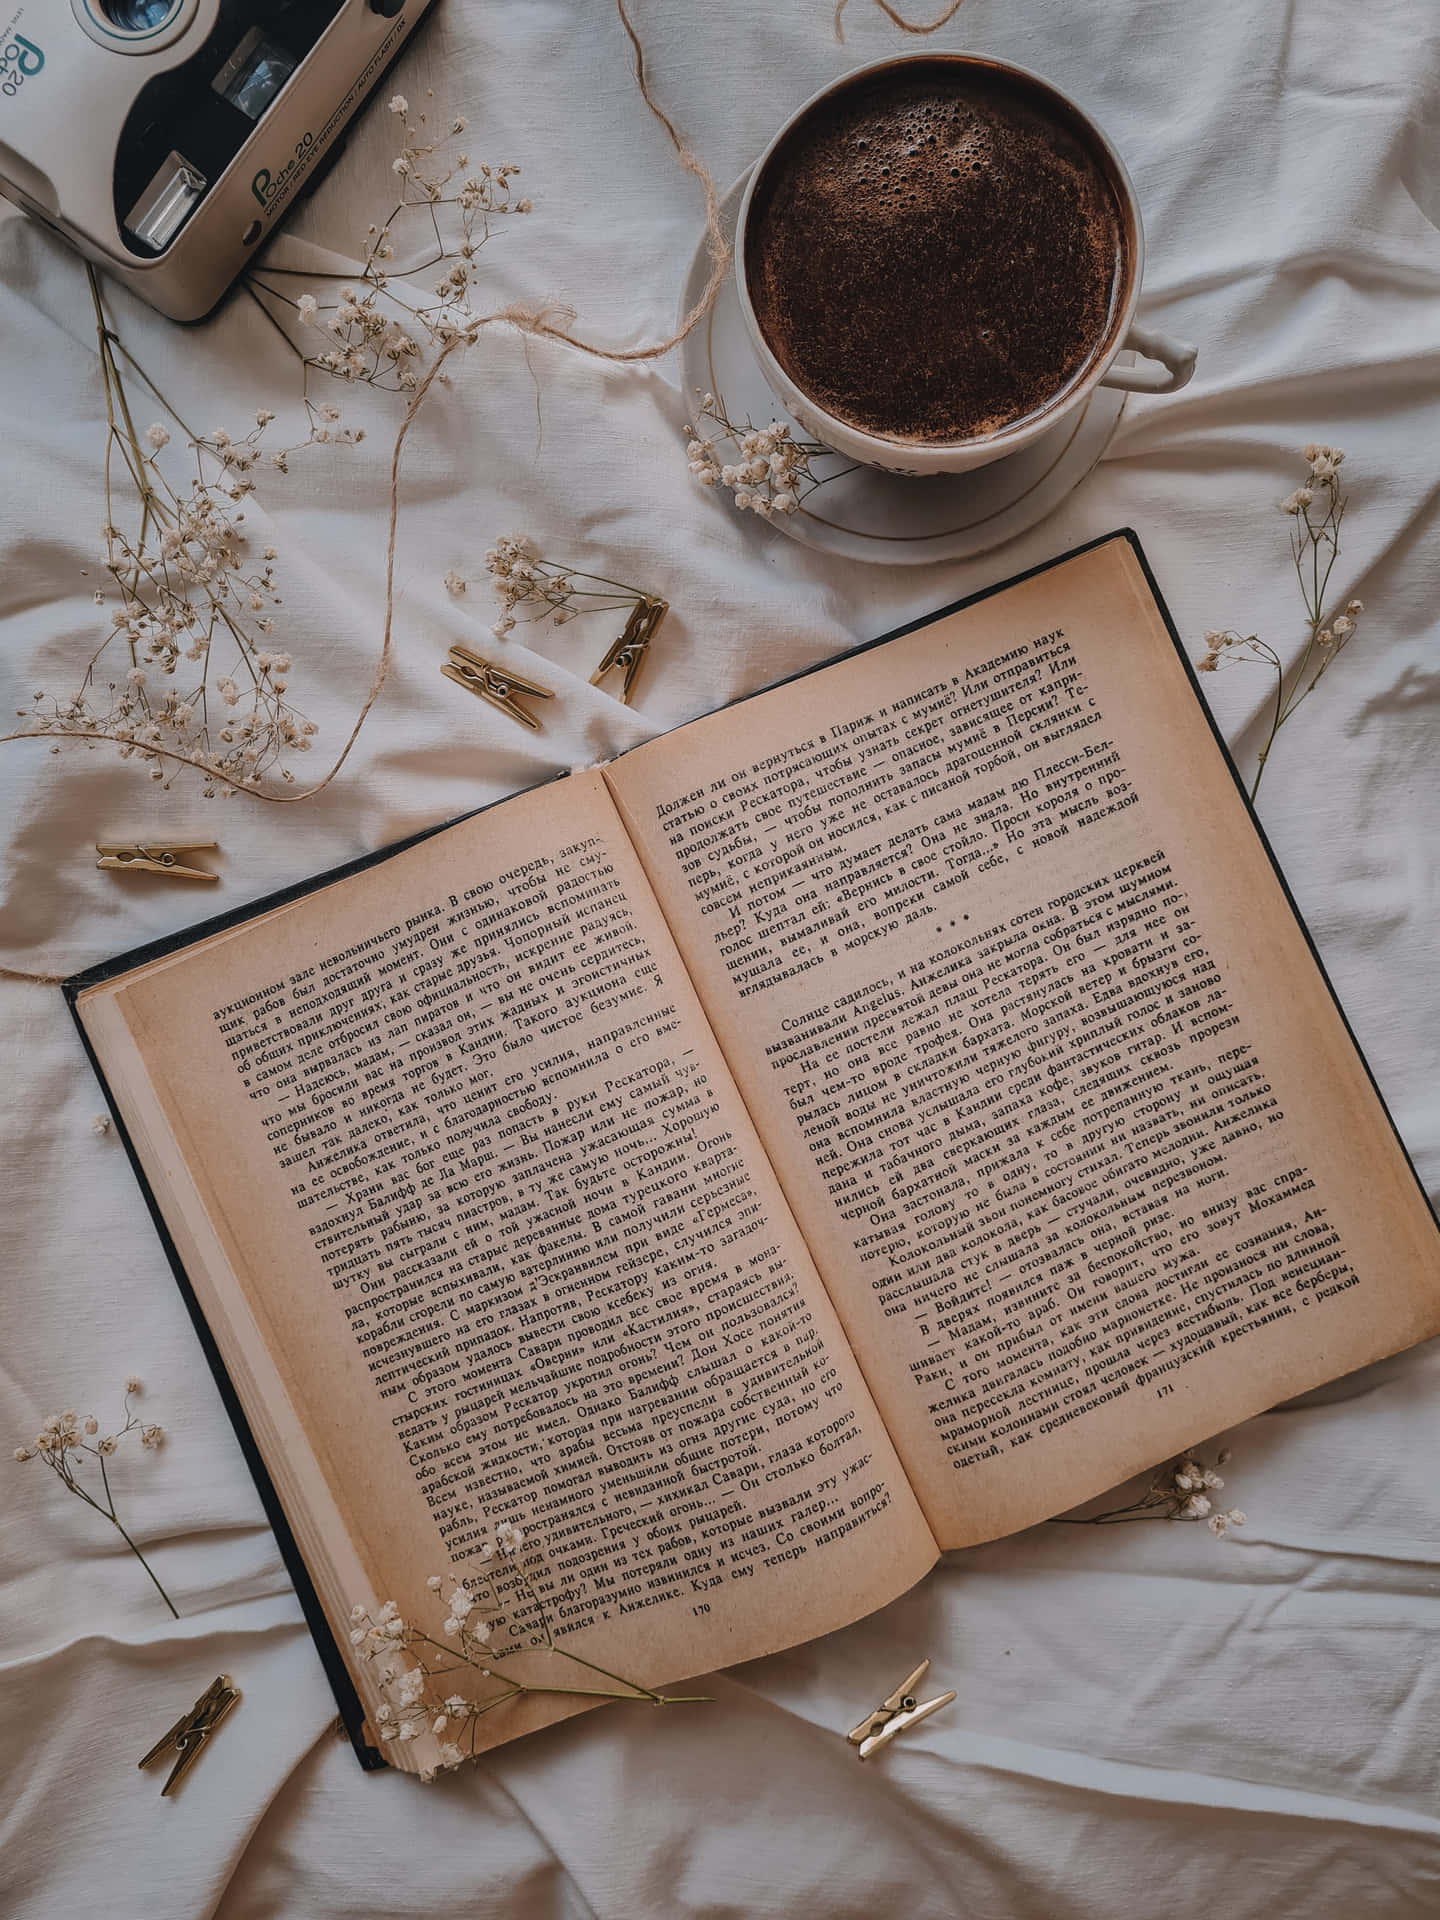 A Book With Coffee And Flowers On A Bed